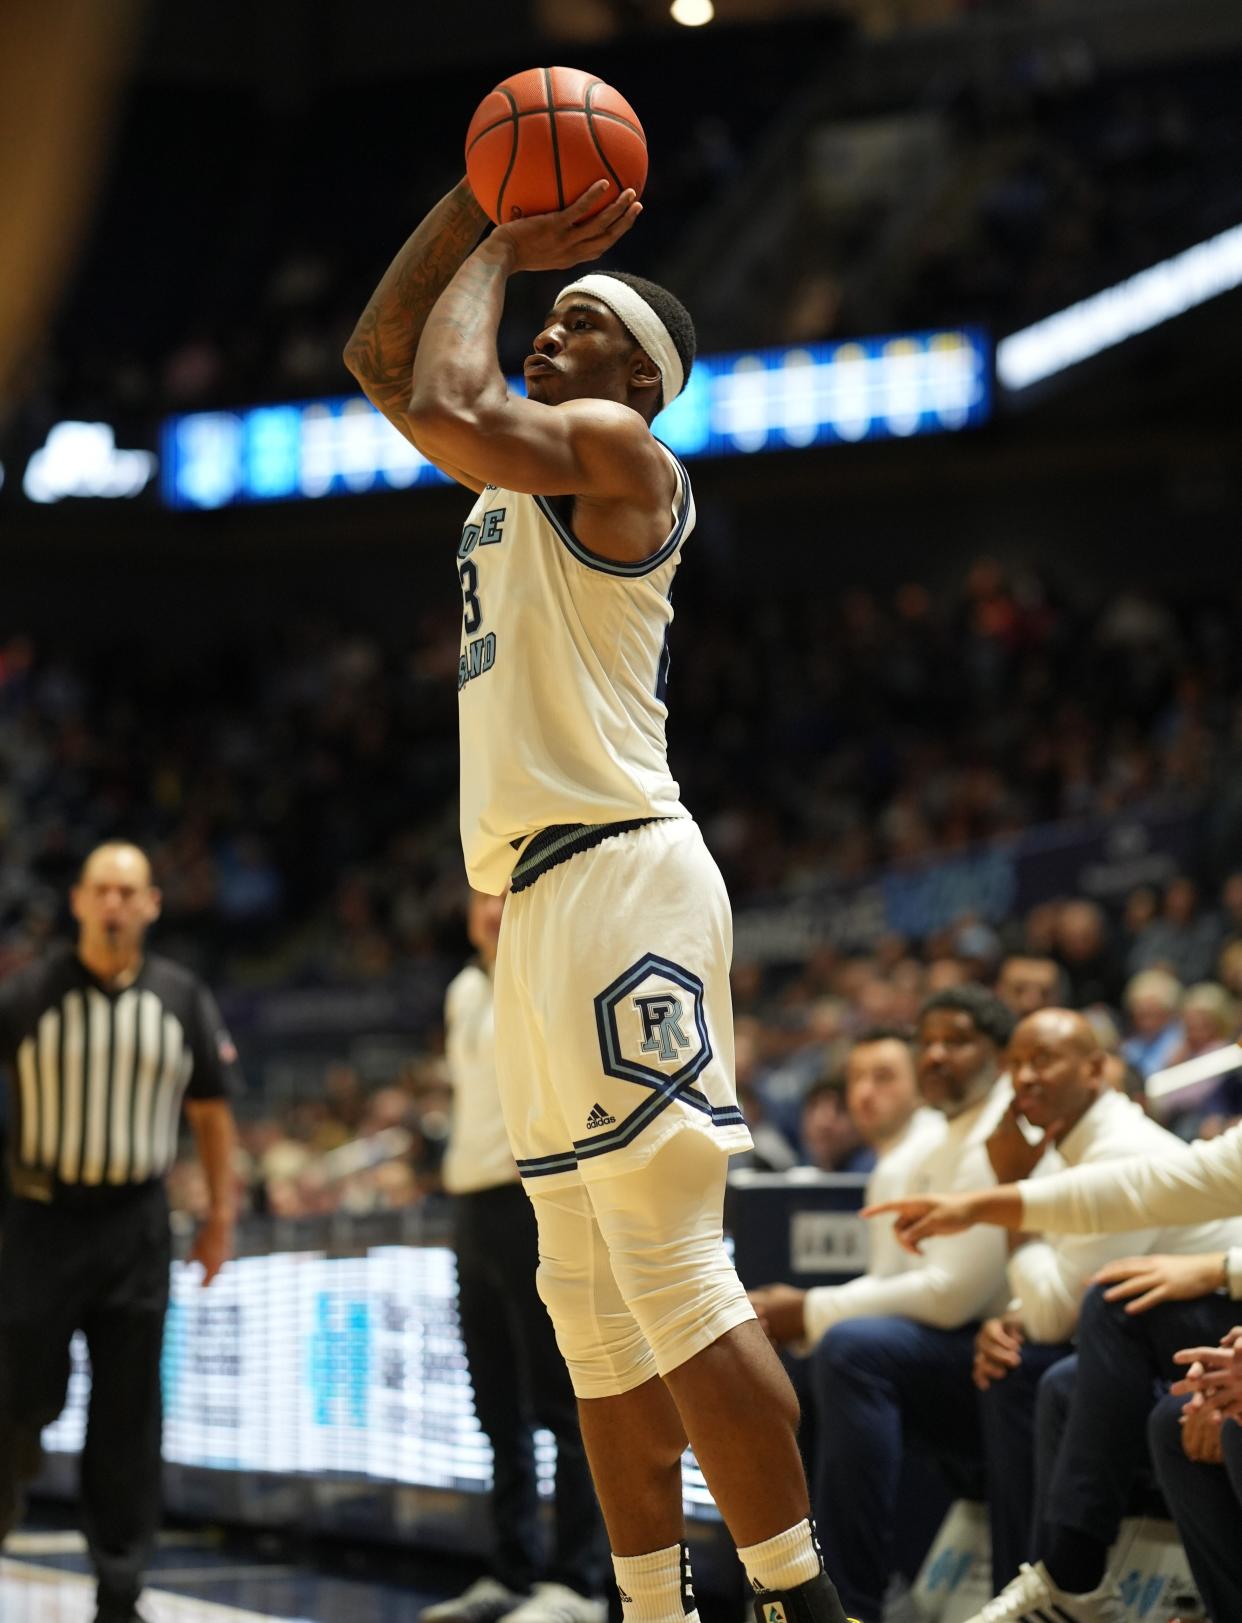 Rhode Island forward David Green, a difference-maker lately for the Rams, shoots a 3-pointer against UMass on Jan. 13 at the Ryan Center.